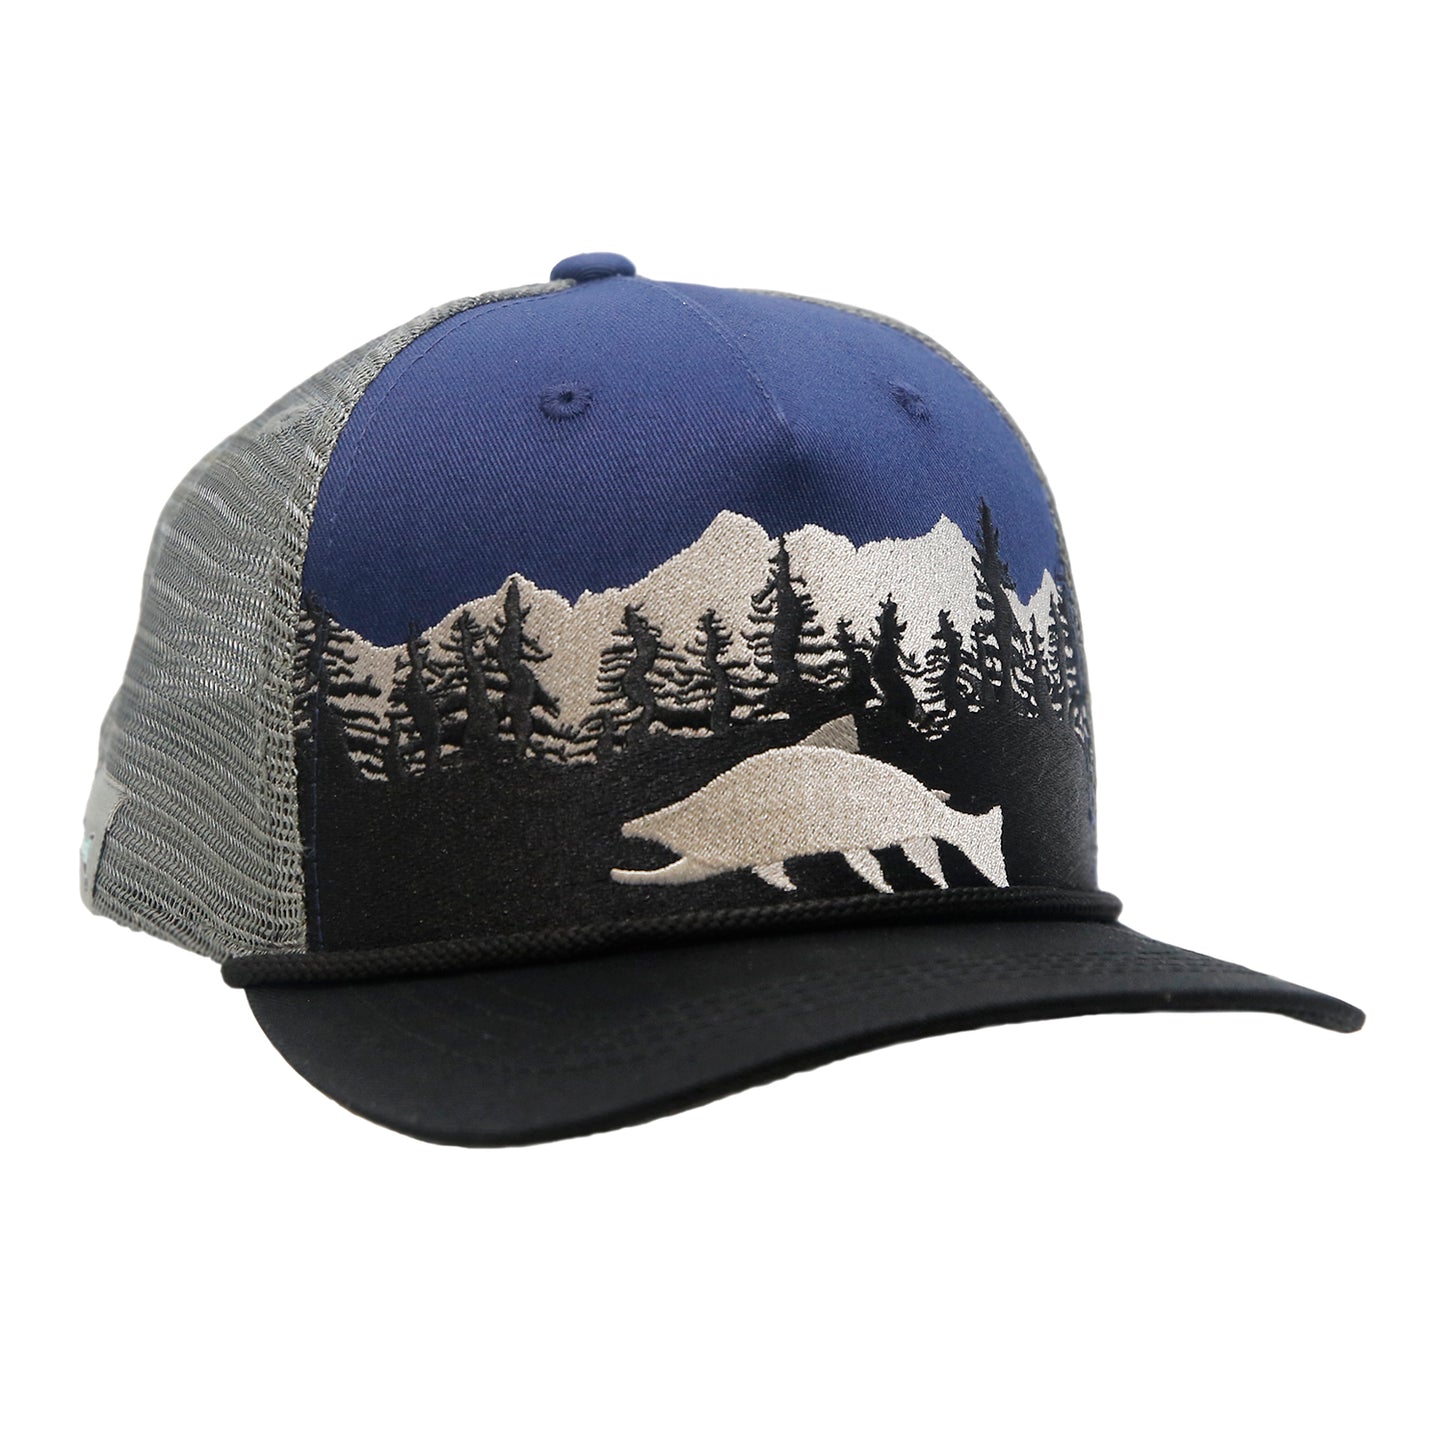  hat with gray mesh in the back and a black brim with a black rope above it.  The front has embroidery of a fish in front of pine trees and a mountain with blue fabric in the background